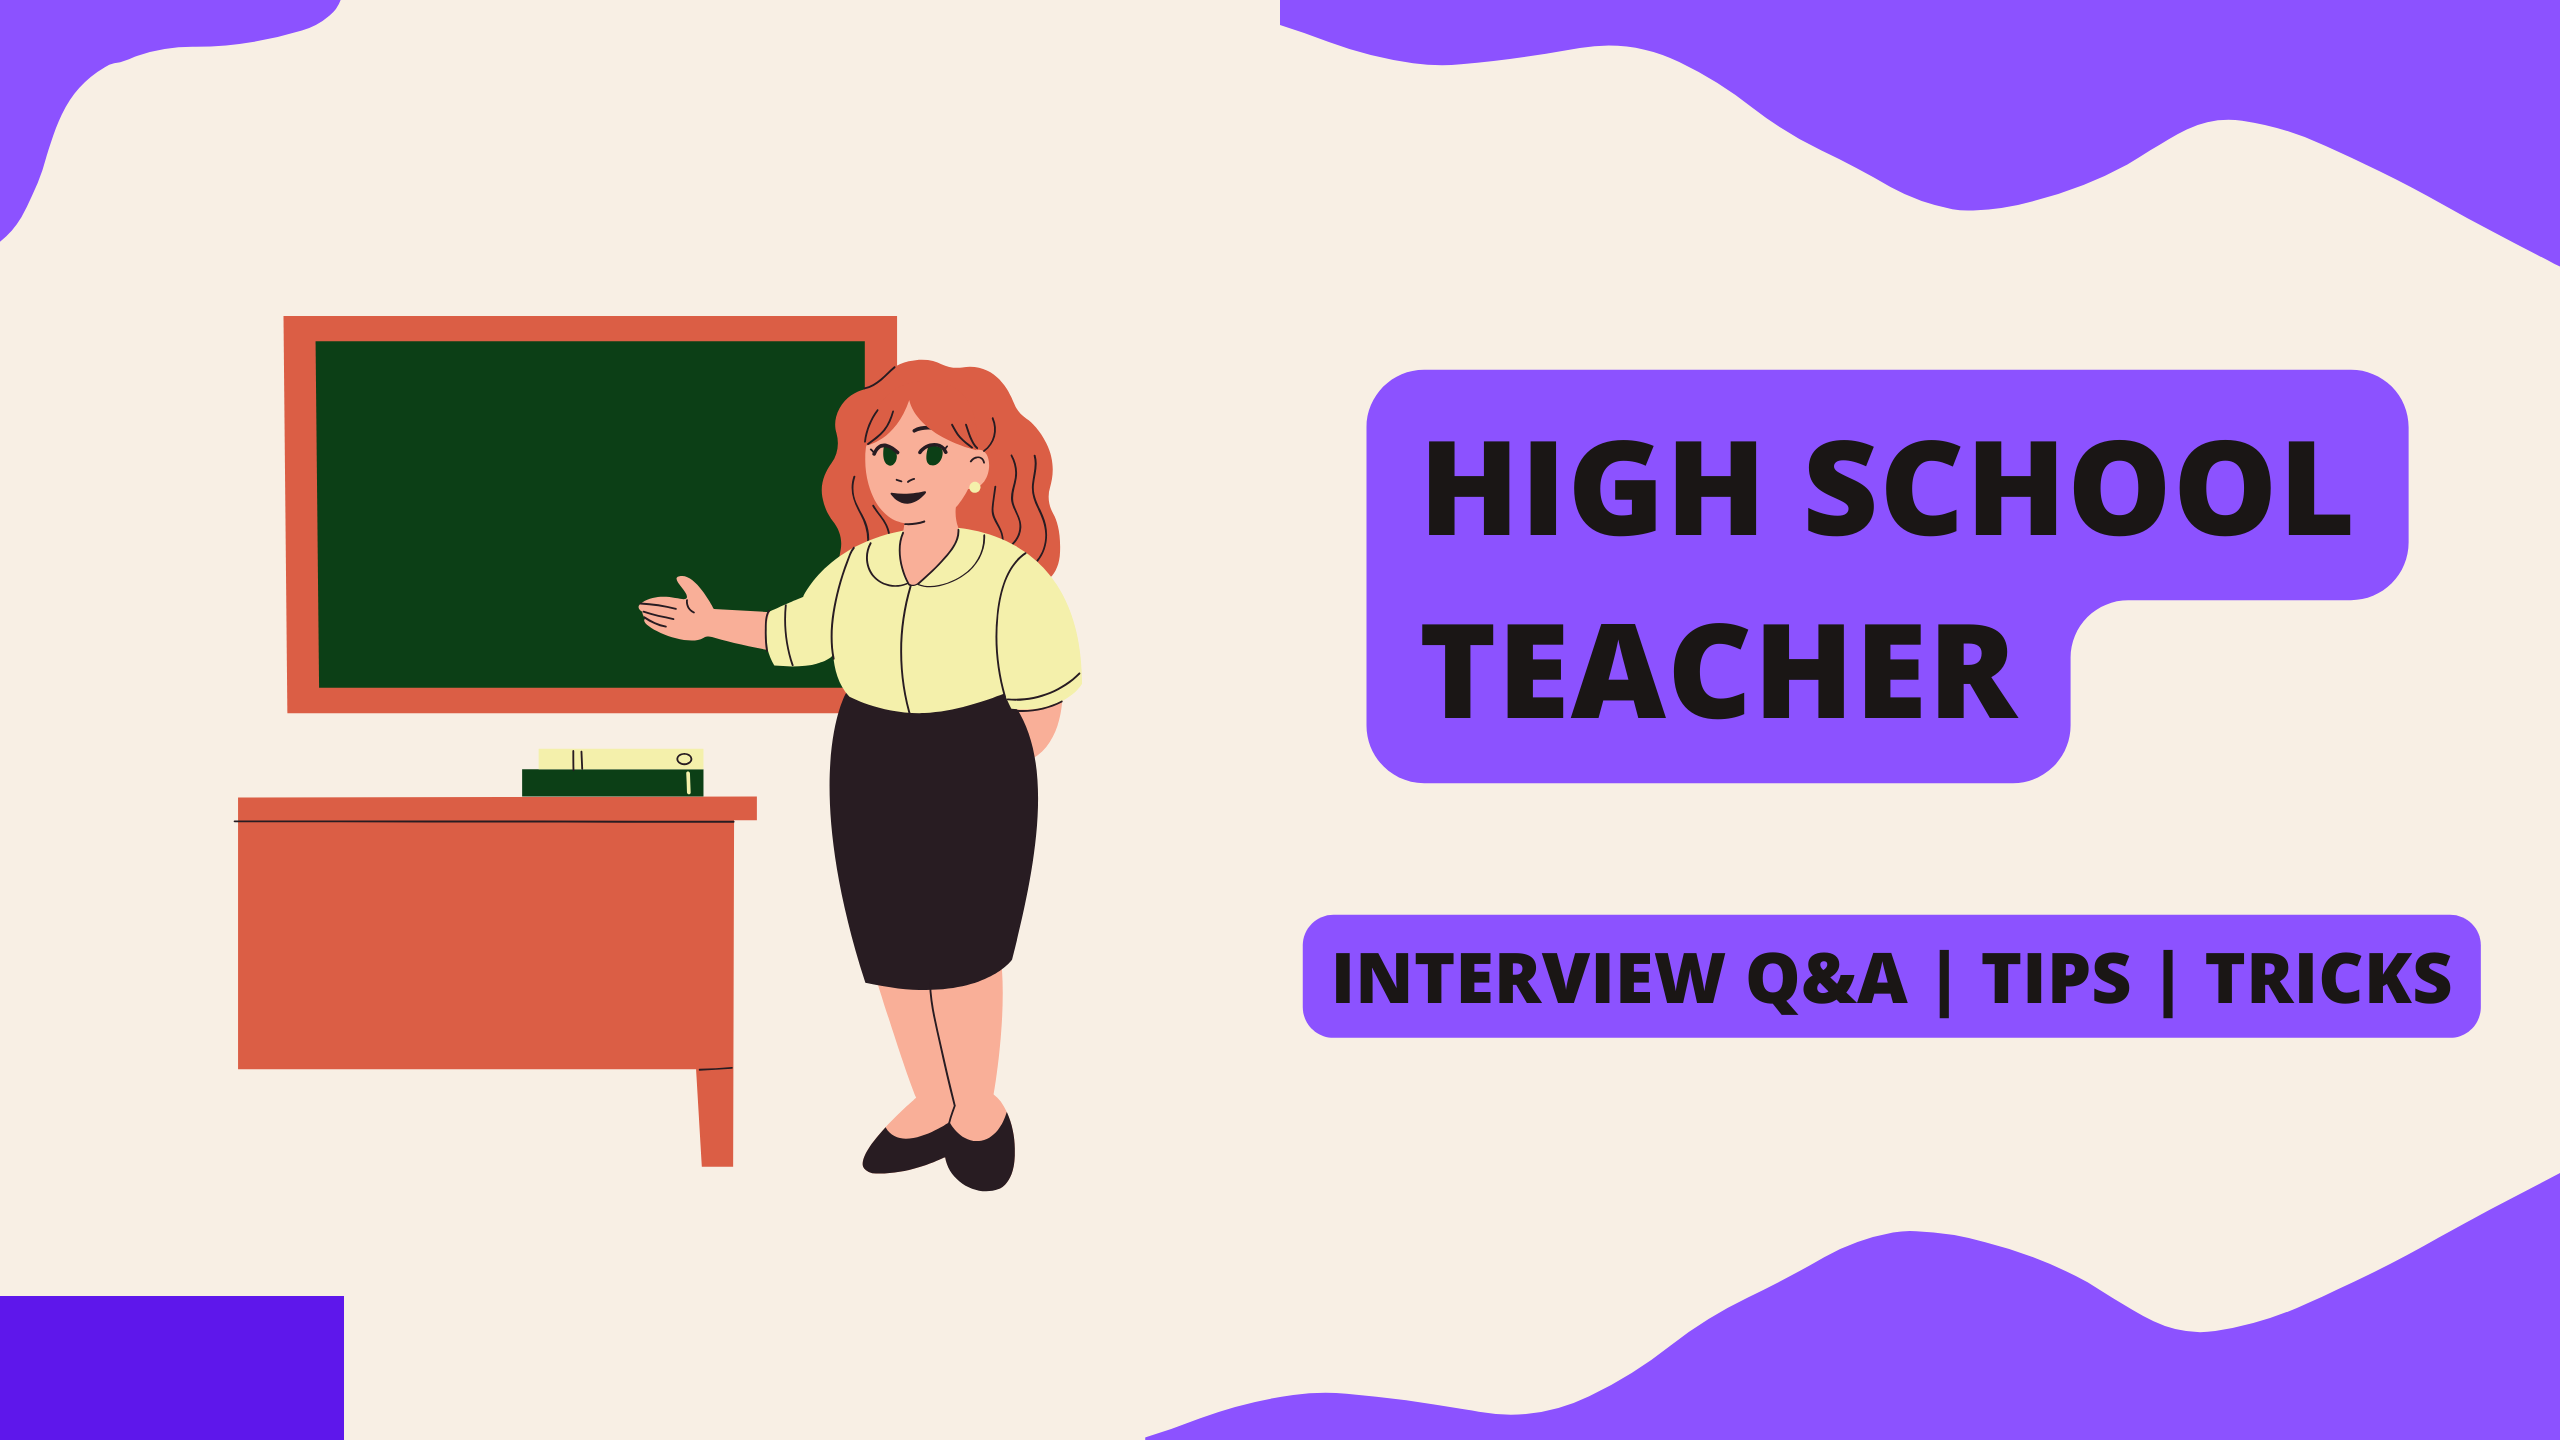 15 Common Interview Q&A for High School Teacher in South Africa